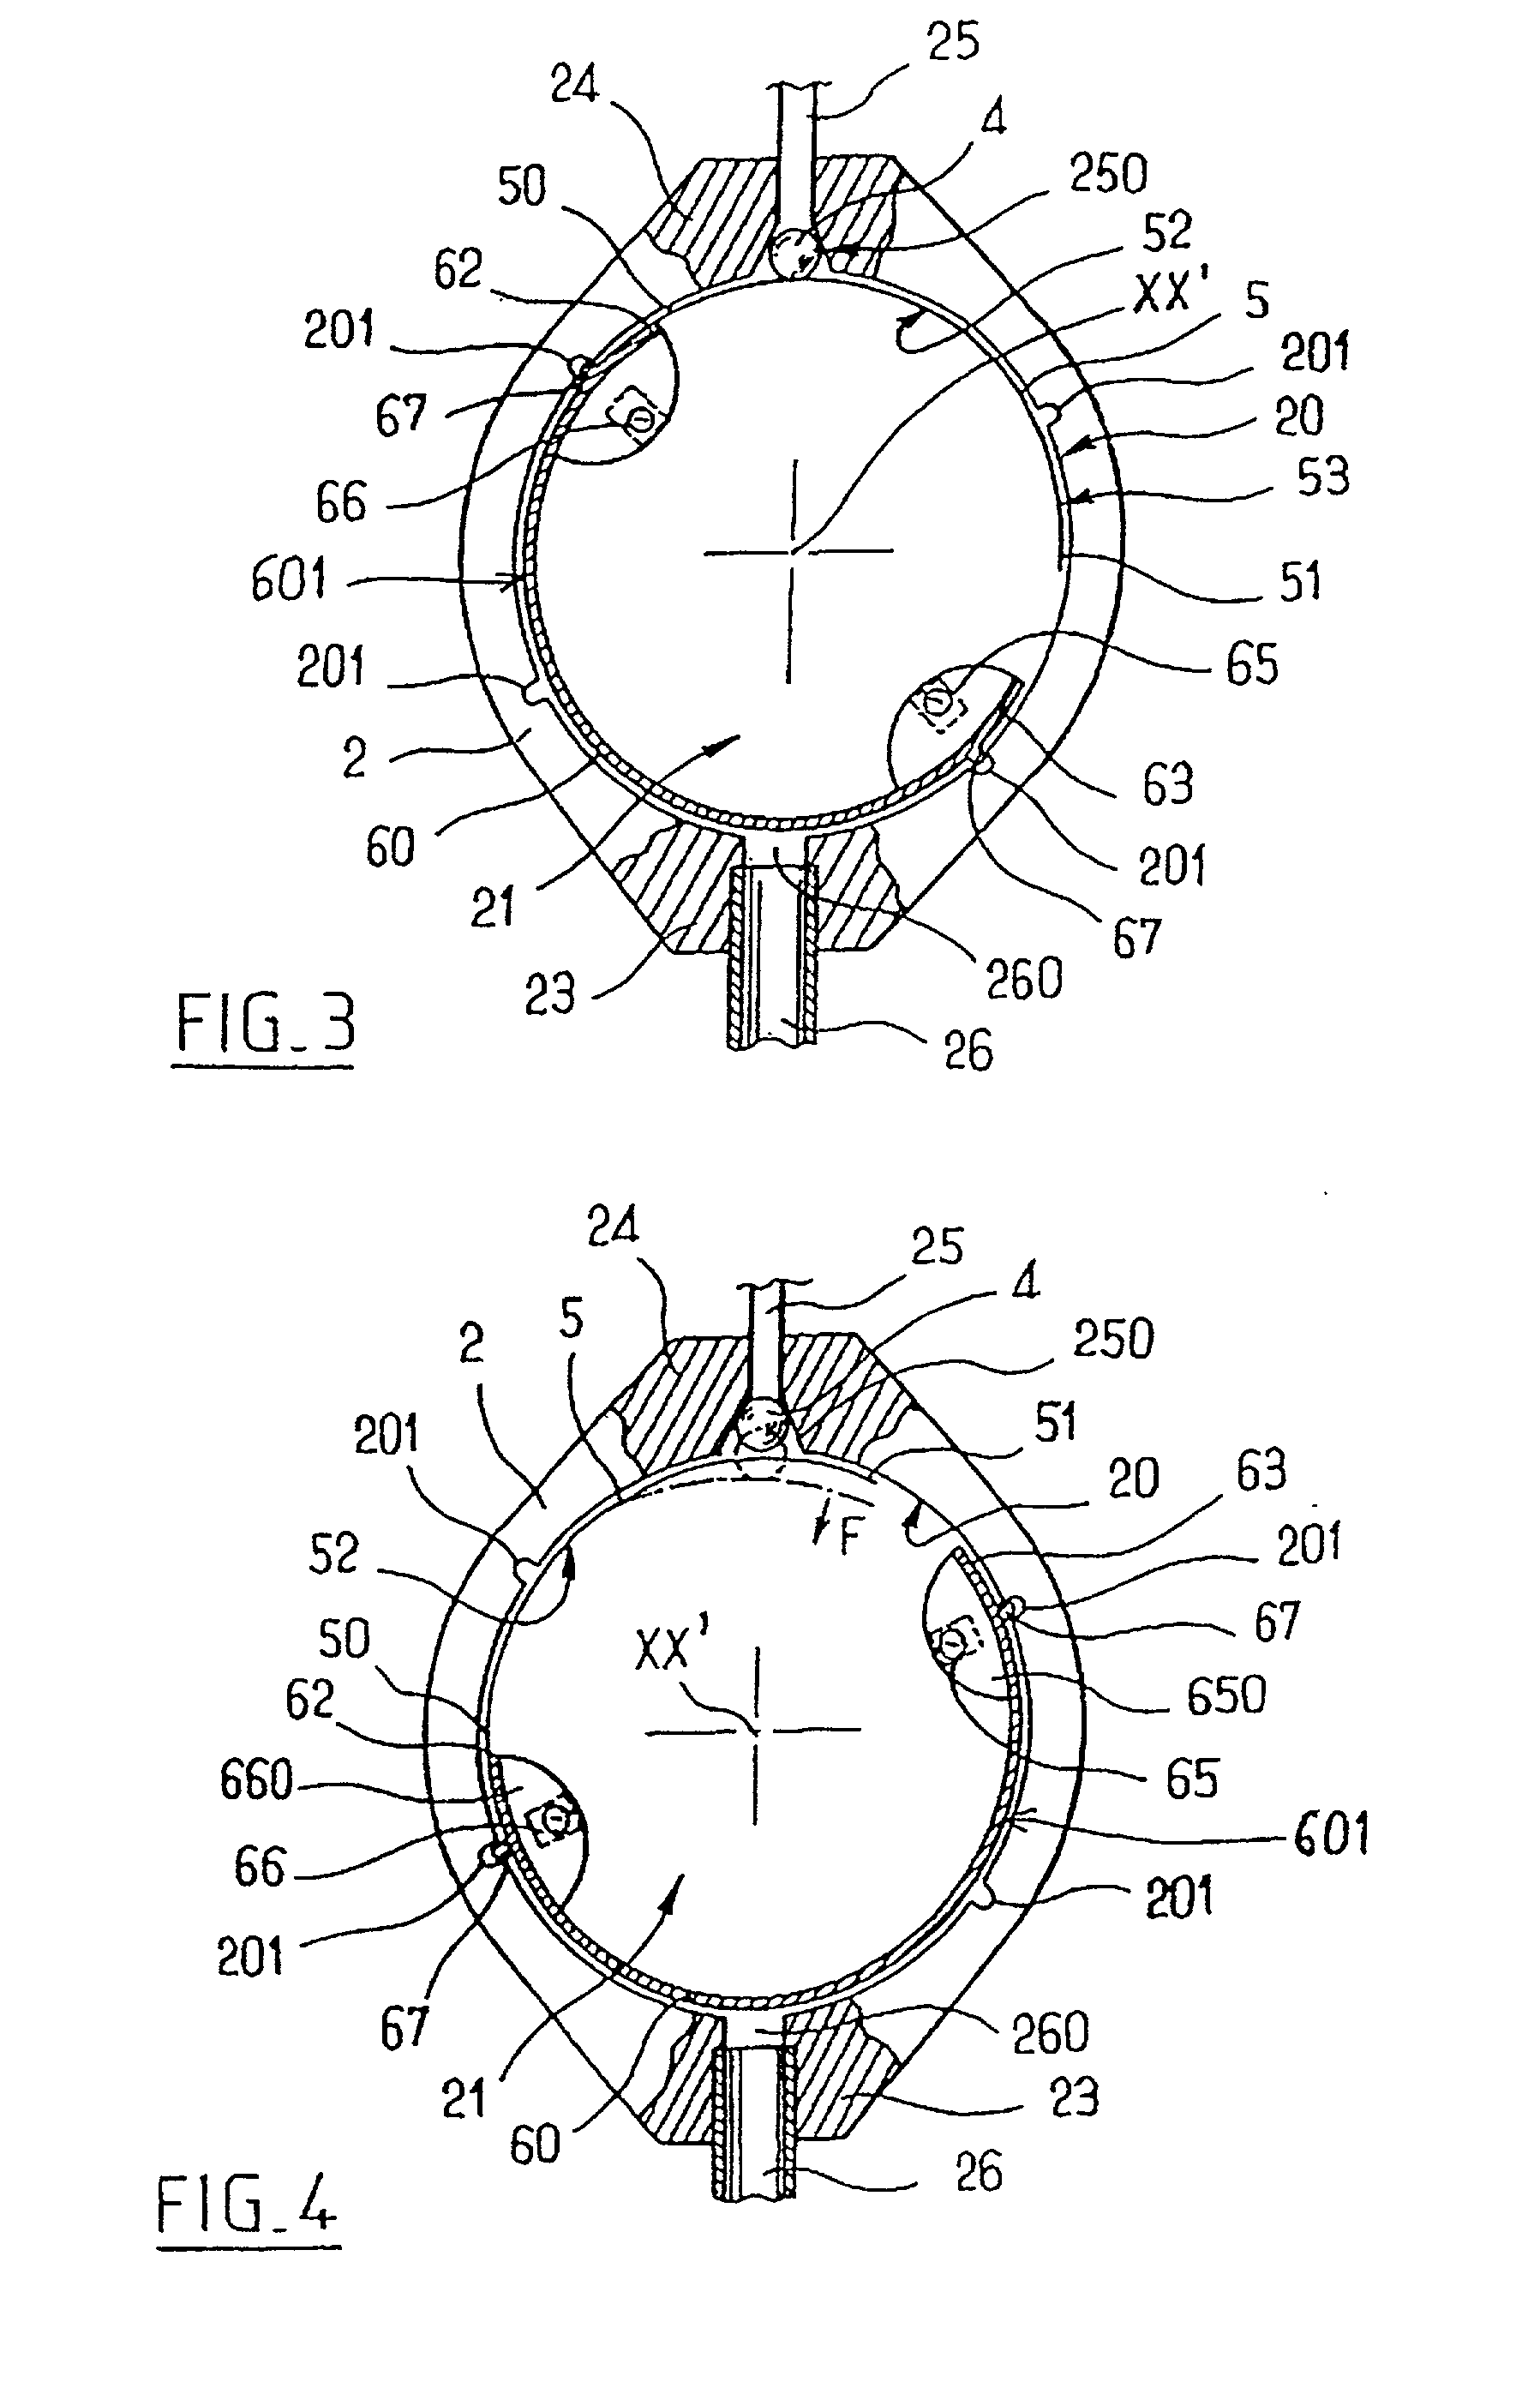 Implantable subcutaneous value for the treatment of hydrocephalus, and adjusting devices therefor